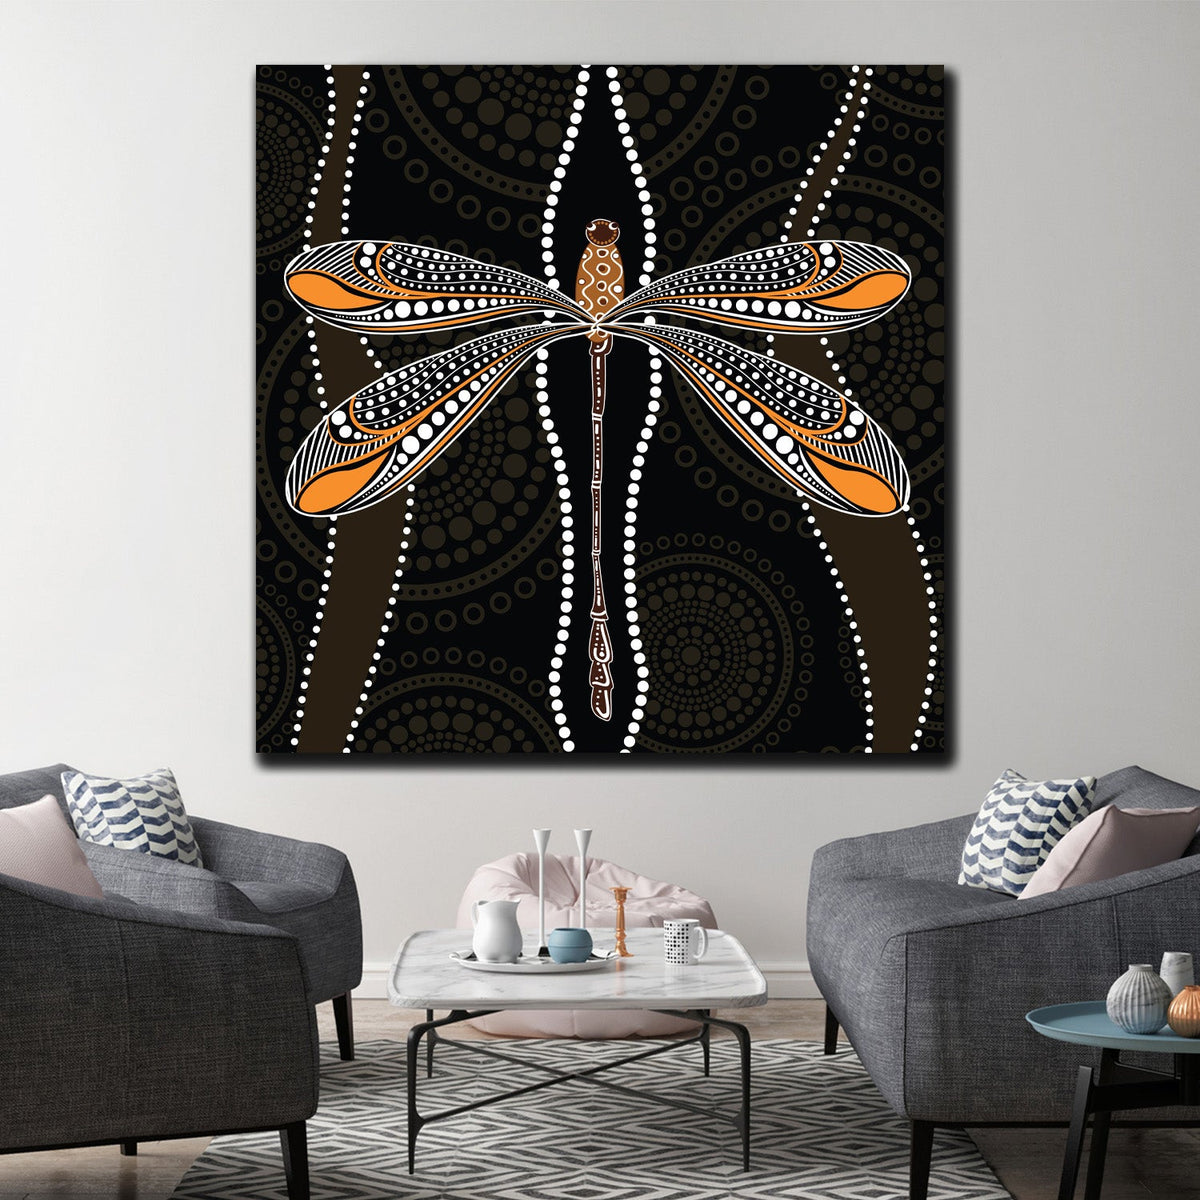 https://cdn.shopify.com/s/files/1/0387/9986/8044/products/DragonflyCanvasArtprintStretched-2.jpg